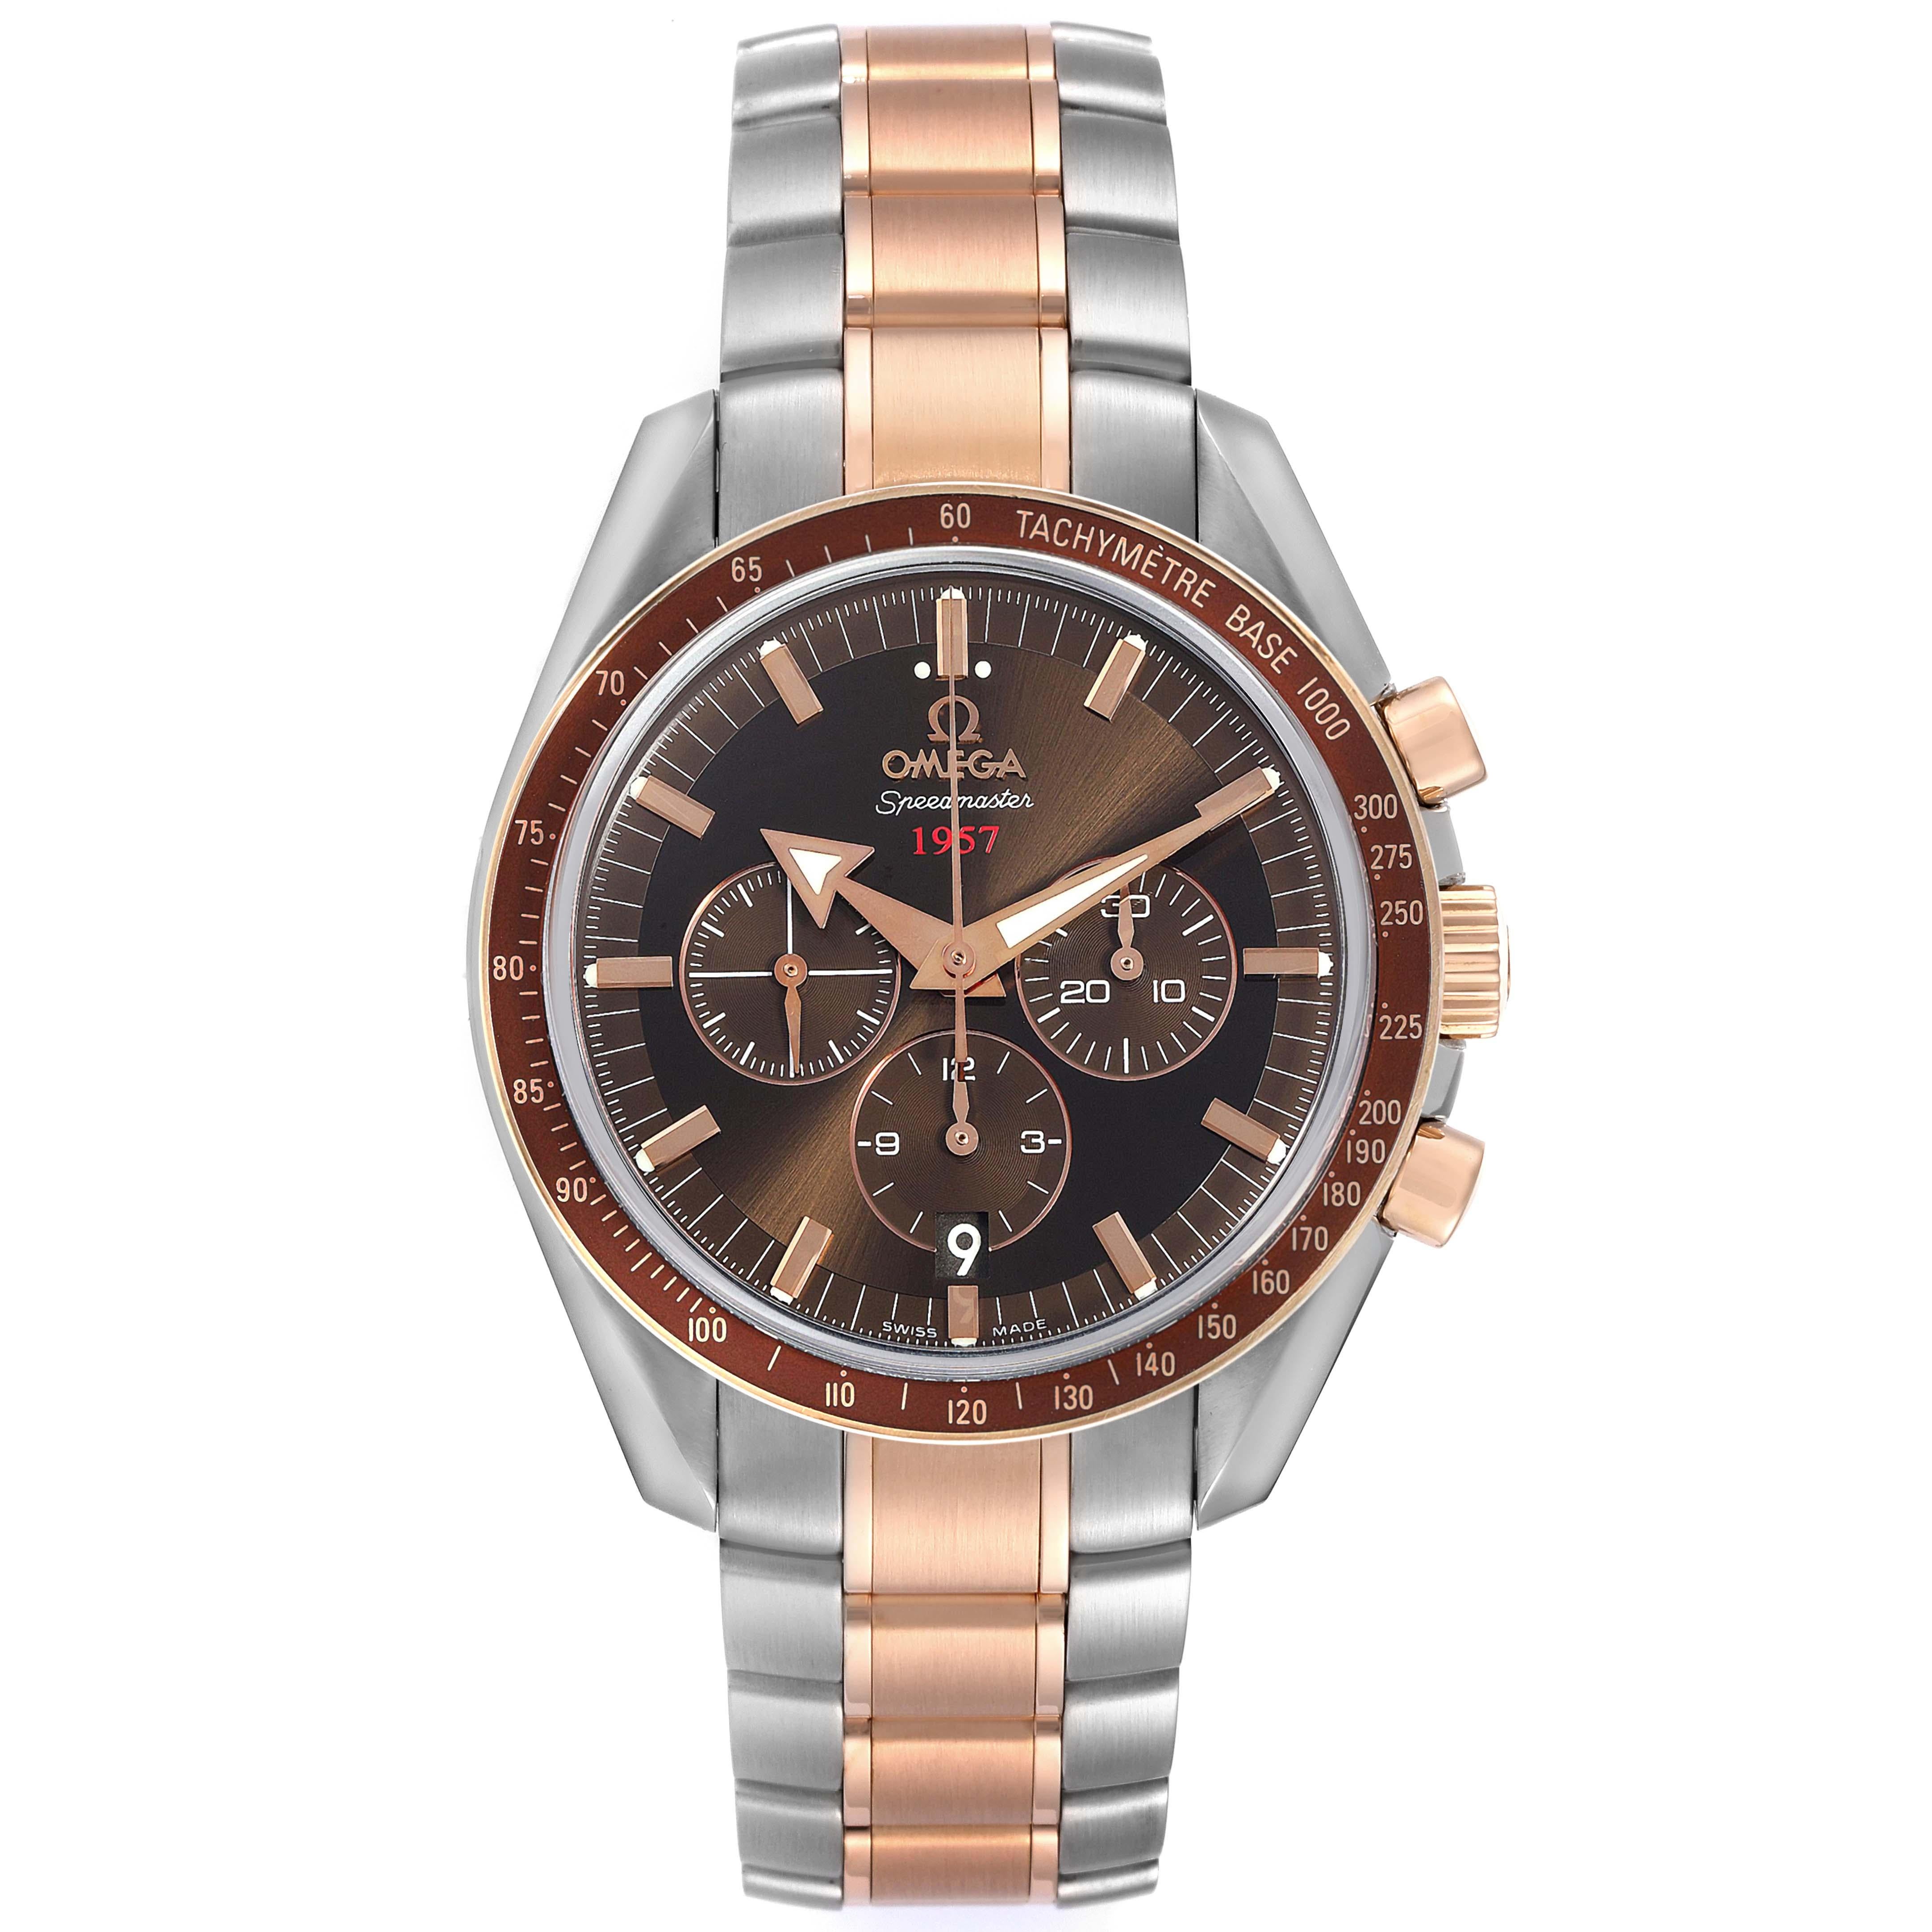 Omega Speedmaster Steel Rose Gold Mens Watch 321.90.42.50.13.001 Box Card. Automatic self-winding chronograph movement with column wheel mechanism and Co-Axial Escapement. Caliber 3313. Stainless steel and 18K rose gold round case 42.0 mm in